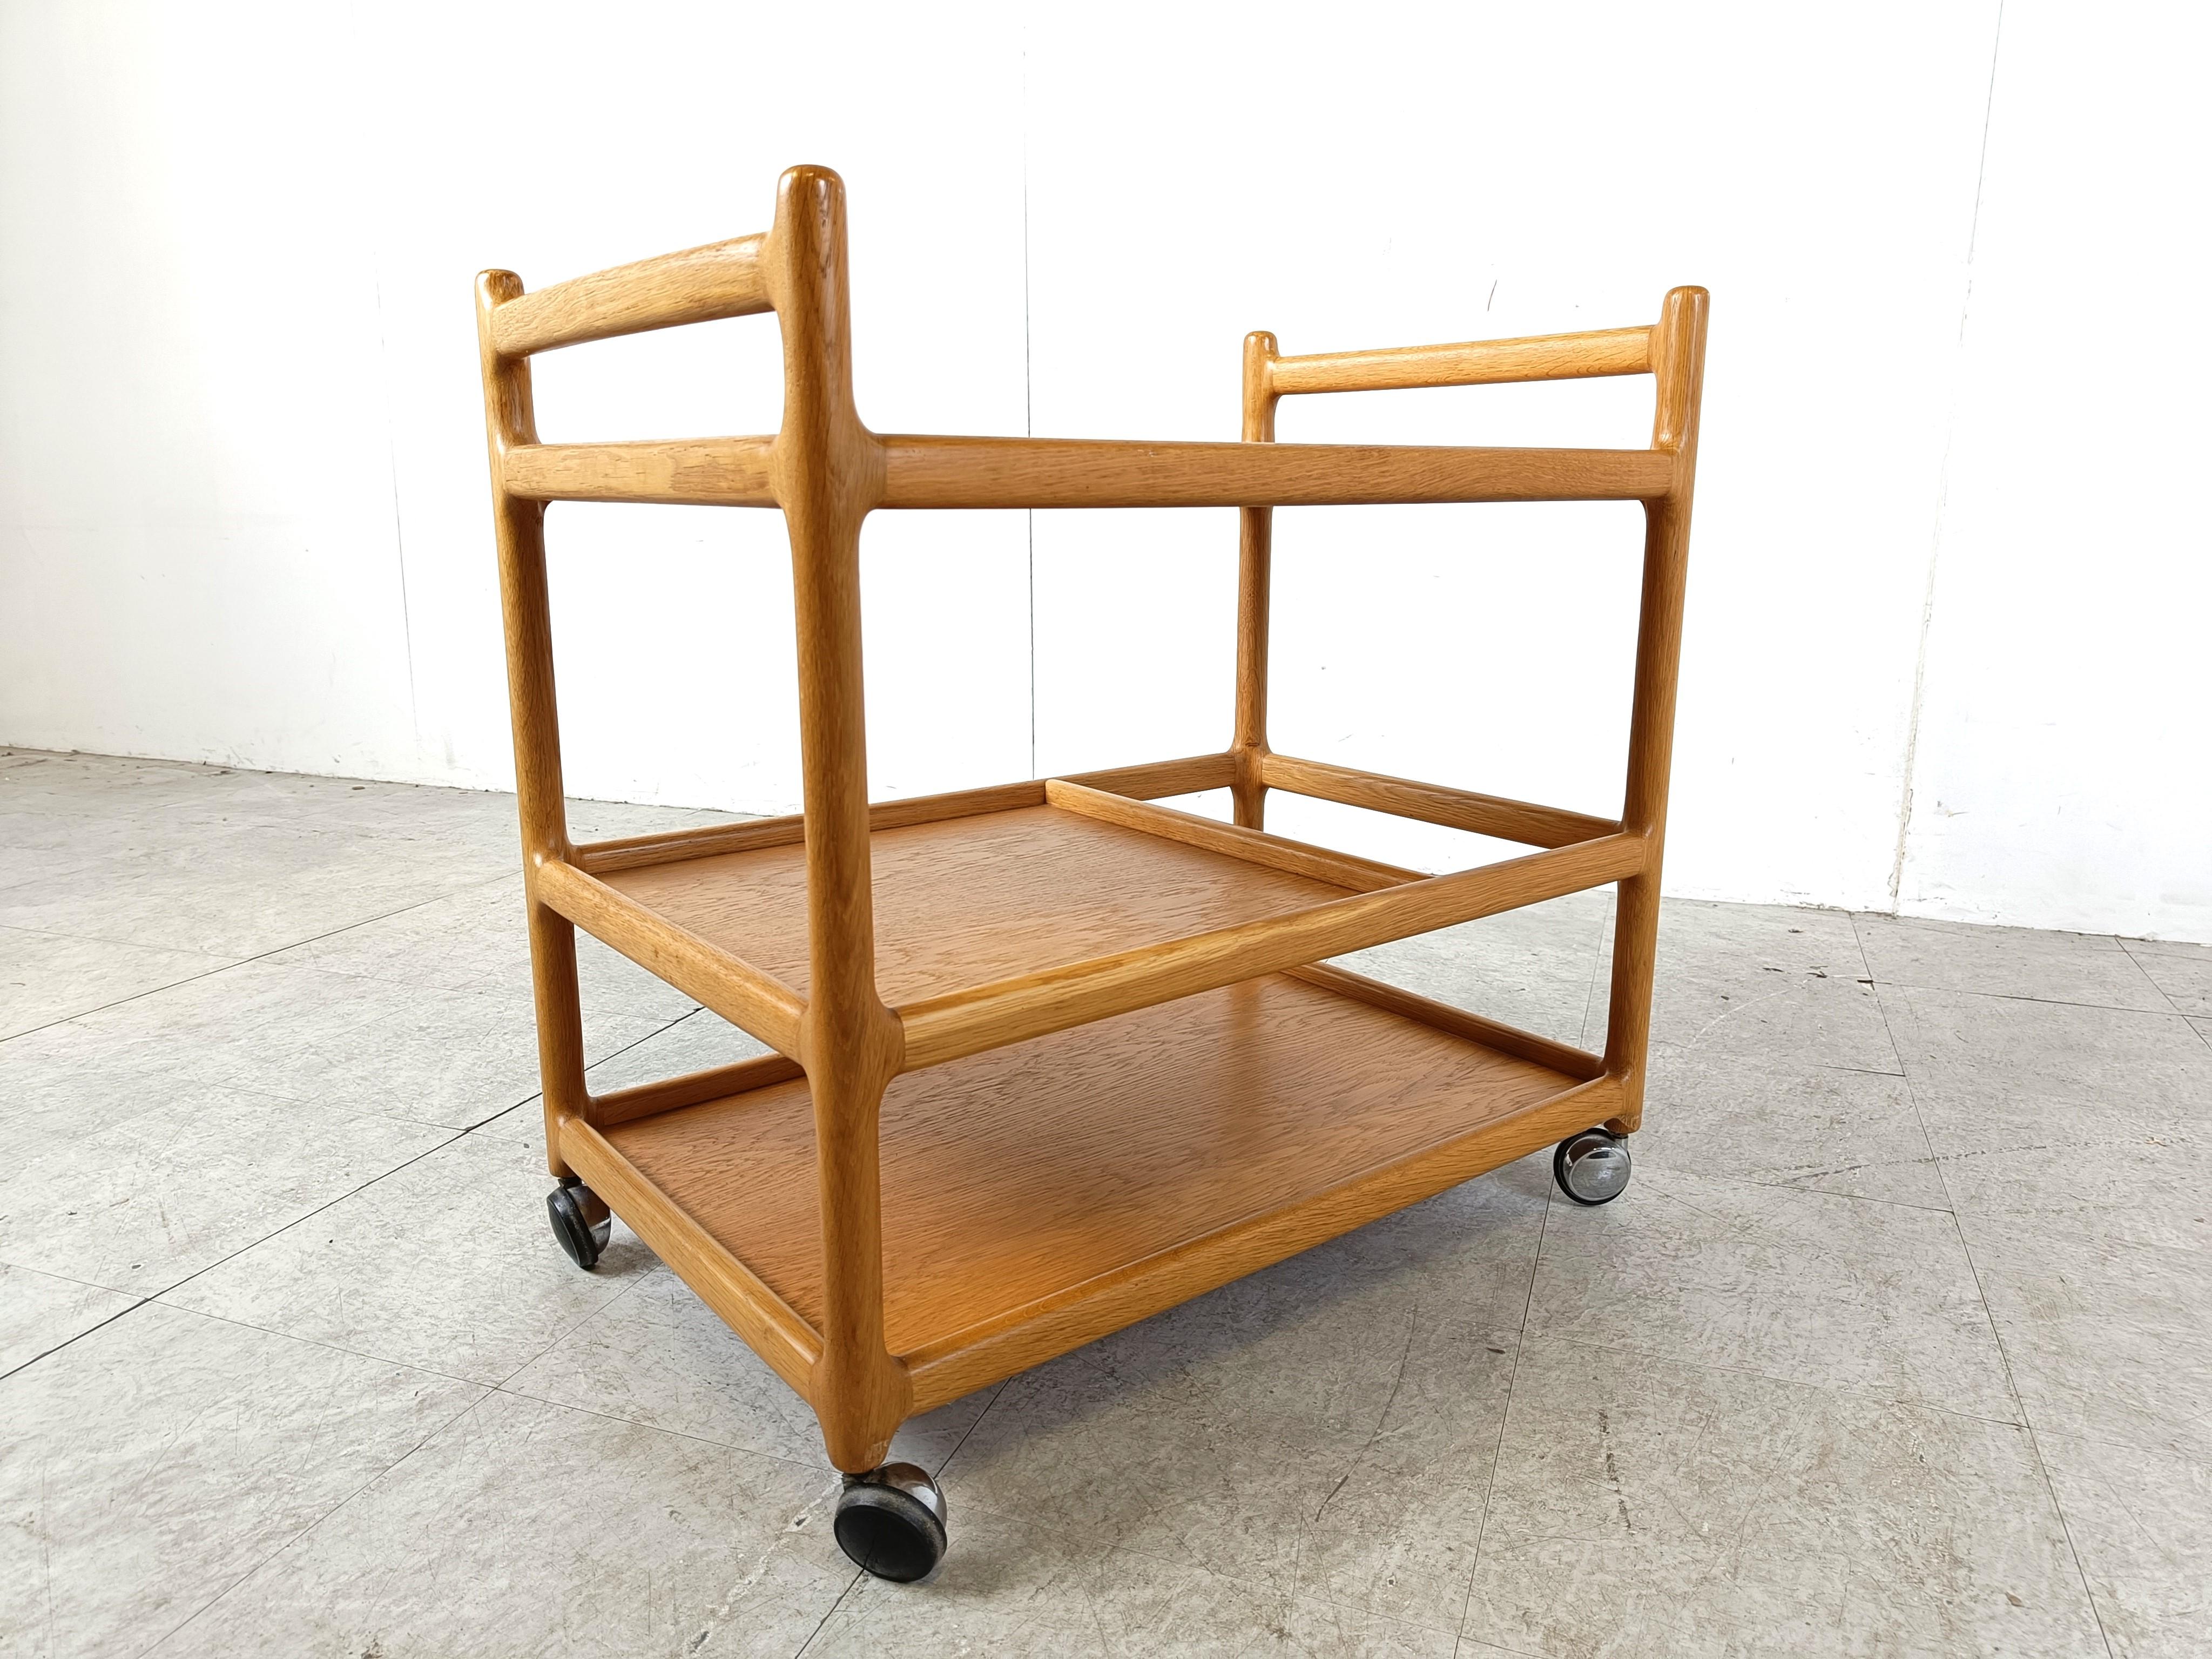 Classic serving car from the 1960s by Johannes Andersen for CFC Silkeborg. Solid teak frame with three shelves in teak veneer and chromed and plastic rollers.

Beautifully crafted frame.

Very good condition

1960s - Sweden

Dimensions:
Height: